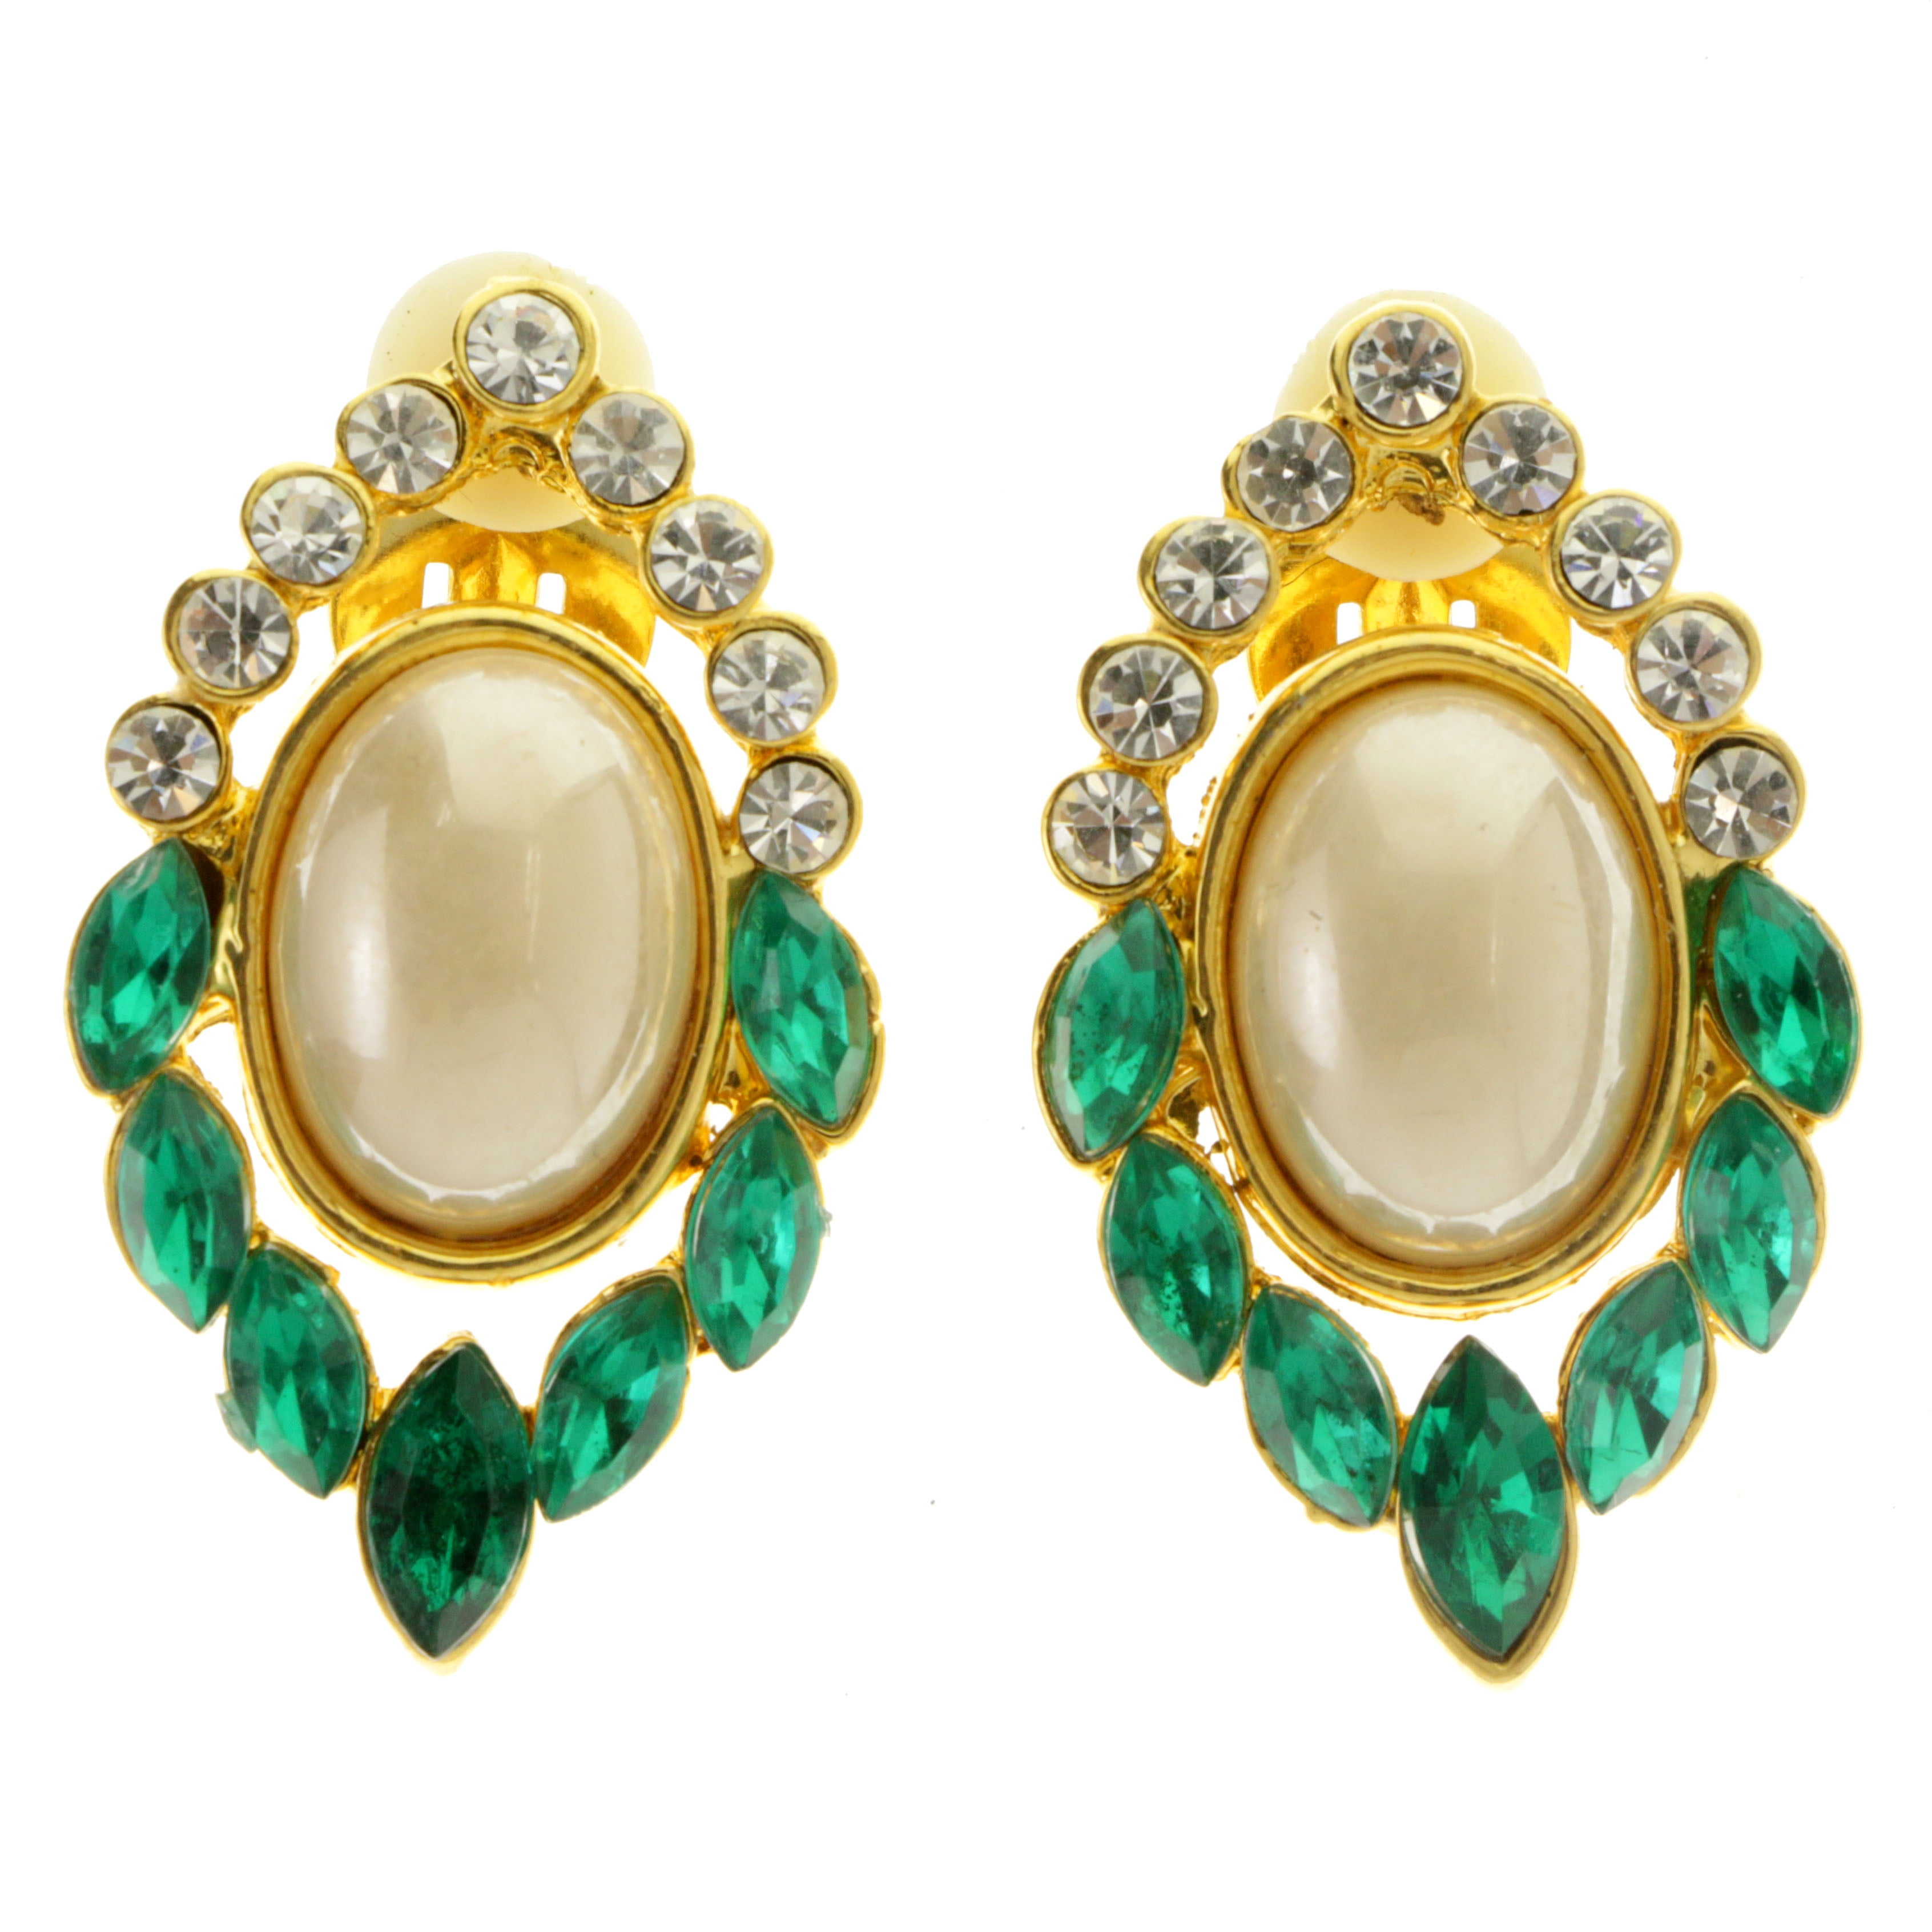 Colorful & Gold-Tone Colored Metal Clip-On-Earrings With Faceted Accents #LQC397 